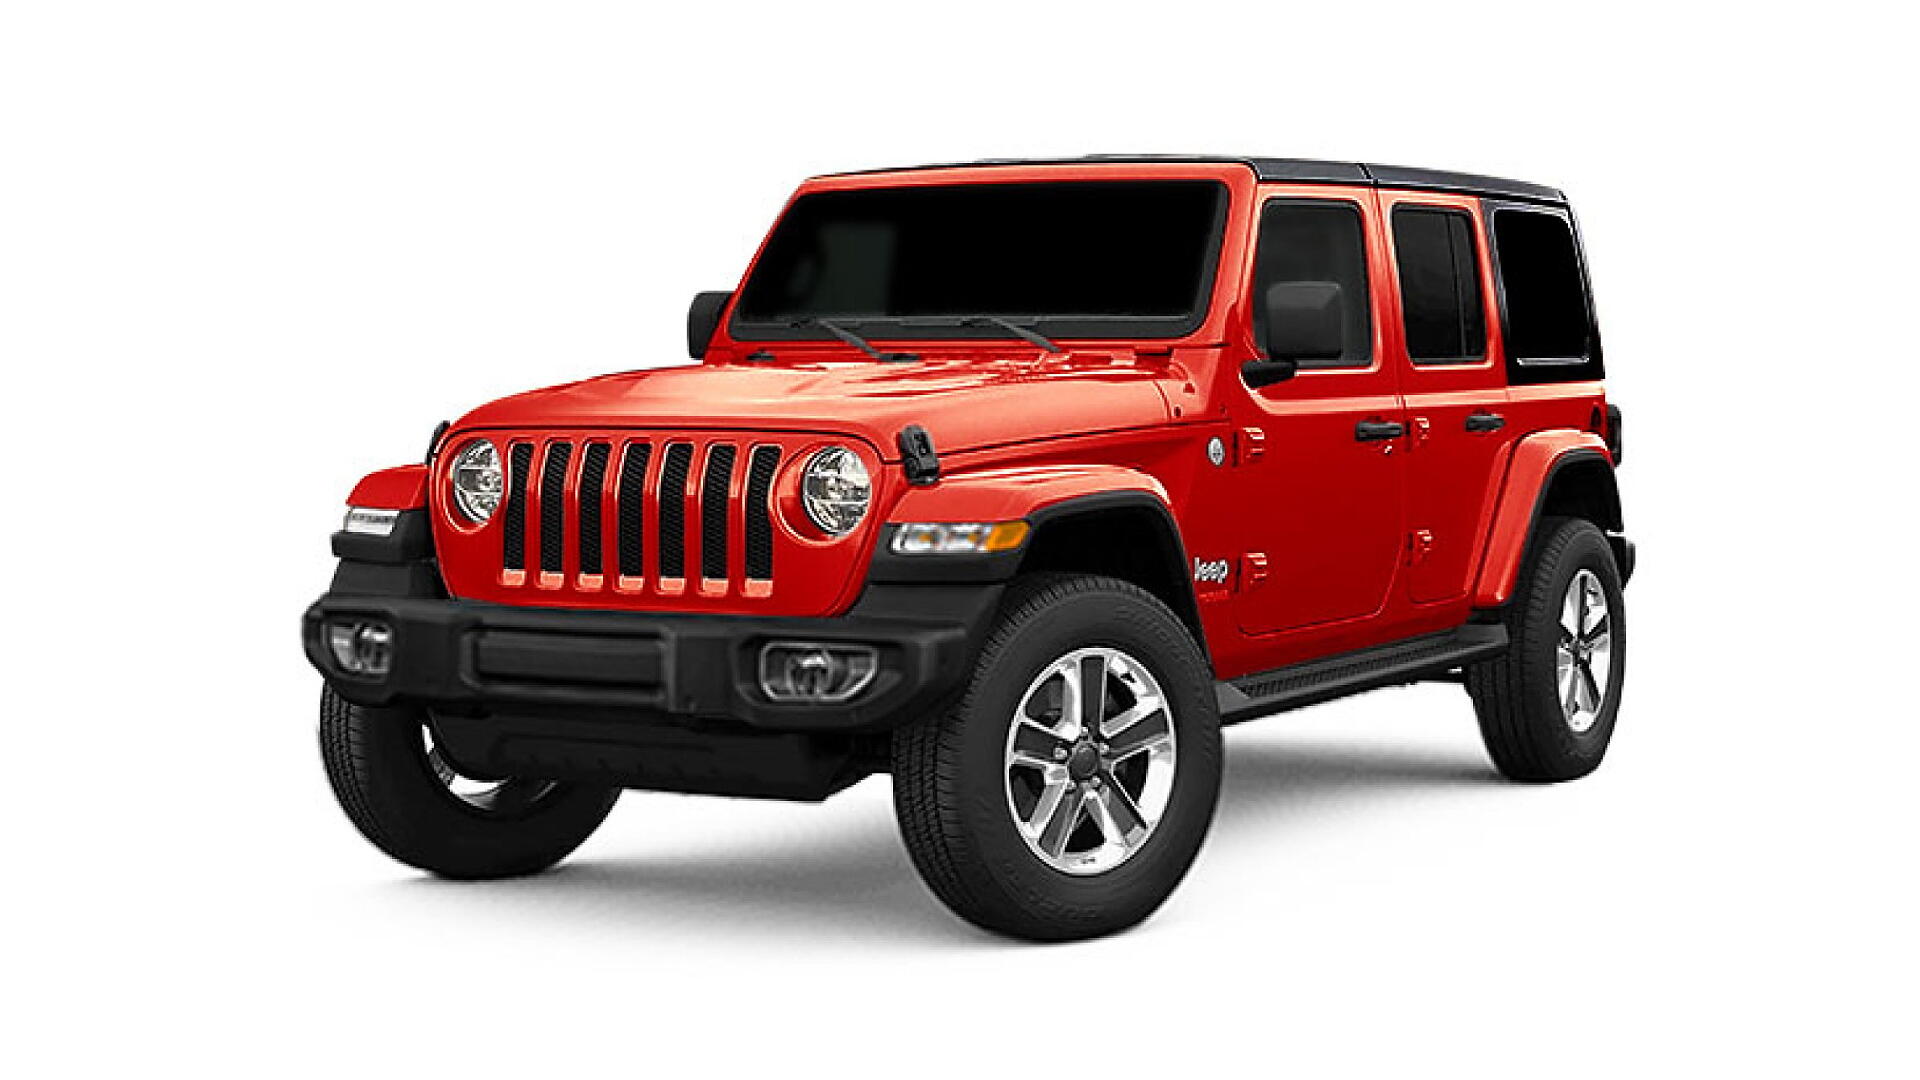 Jeep Wrangler Unlimited (Wrangler Base Model) On Road Price, Specs, Review,  Images, Colours | CarTrade